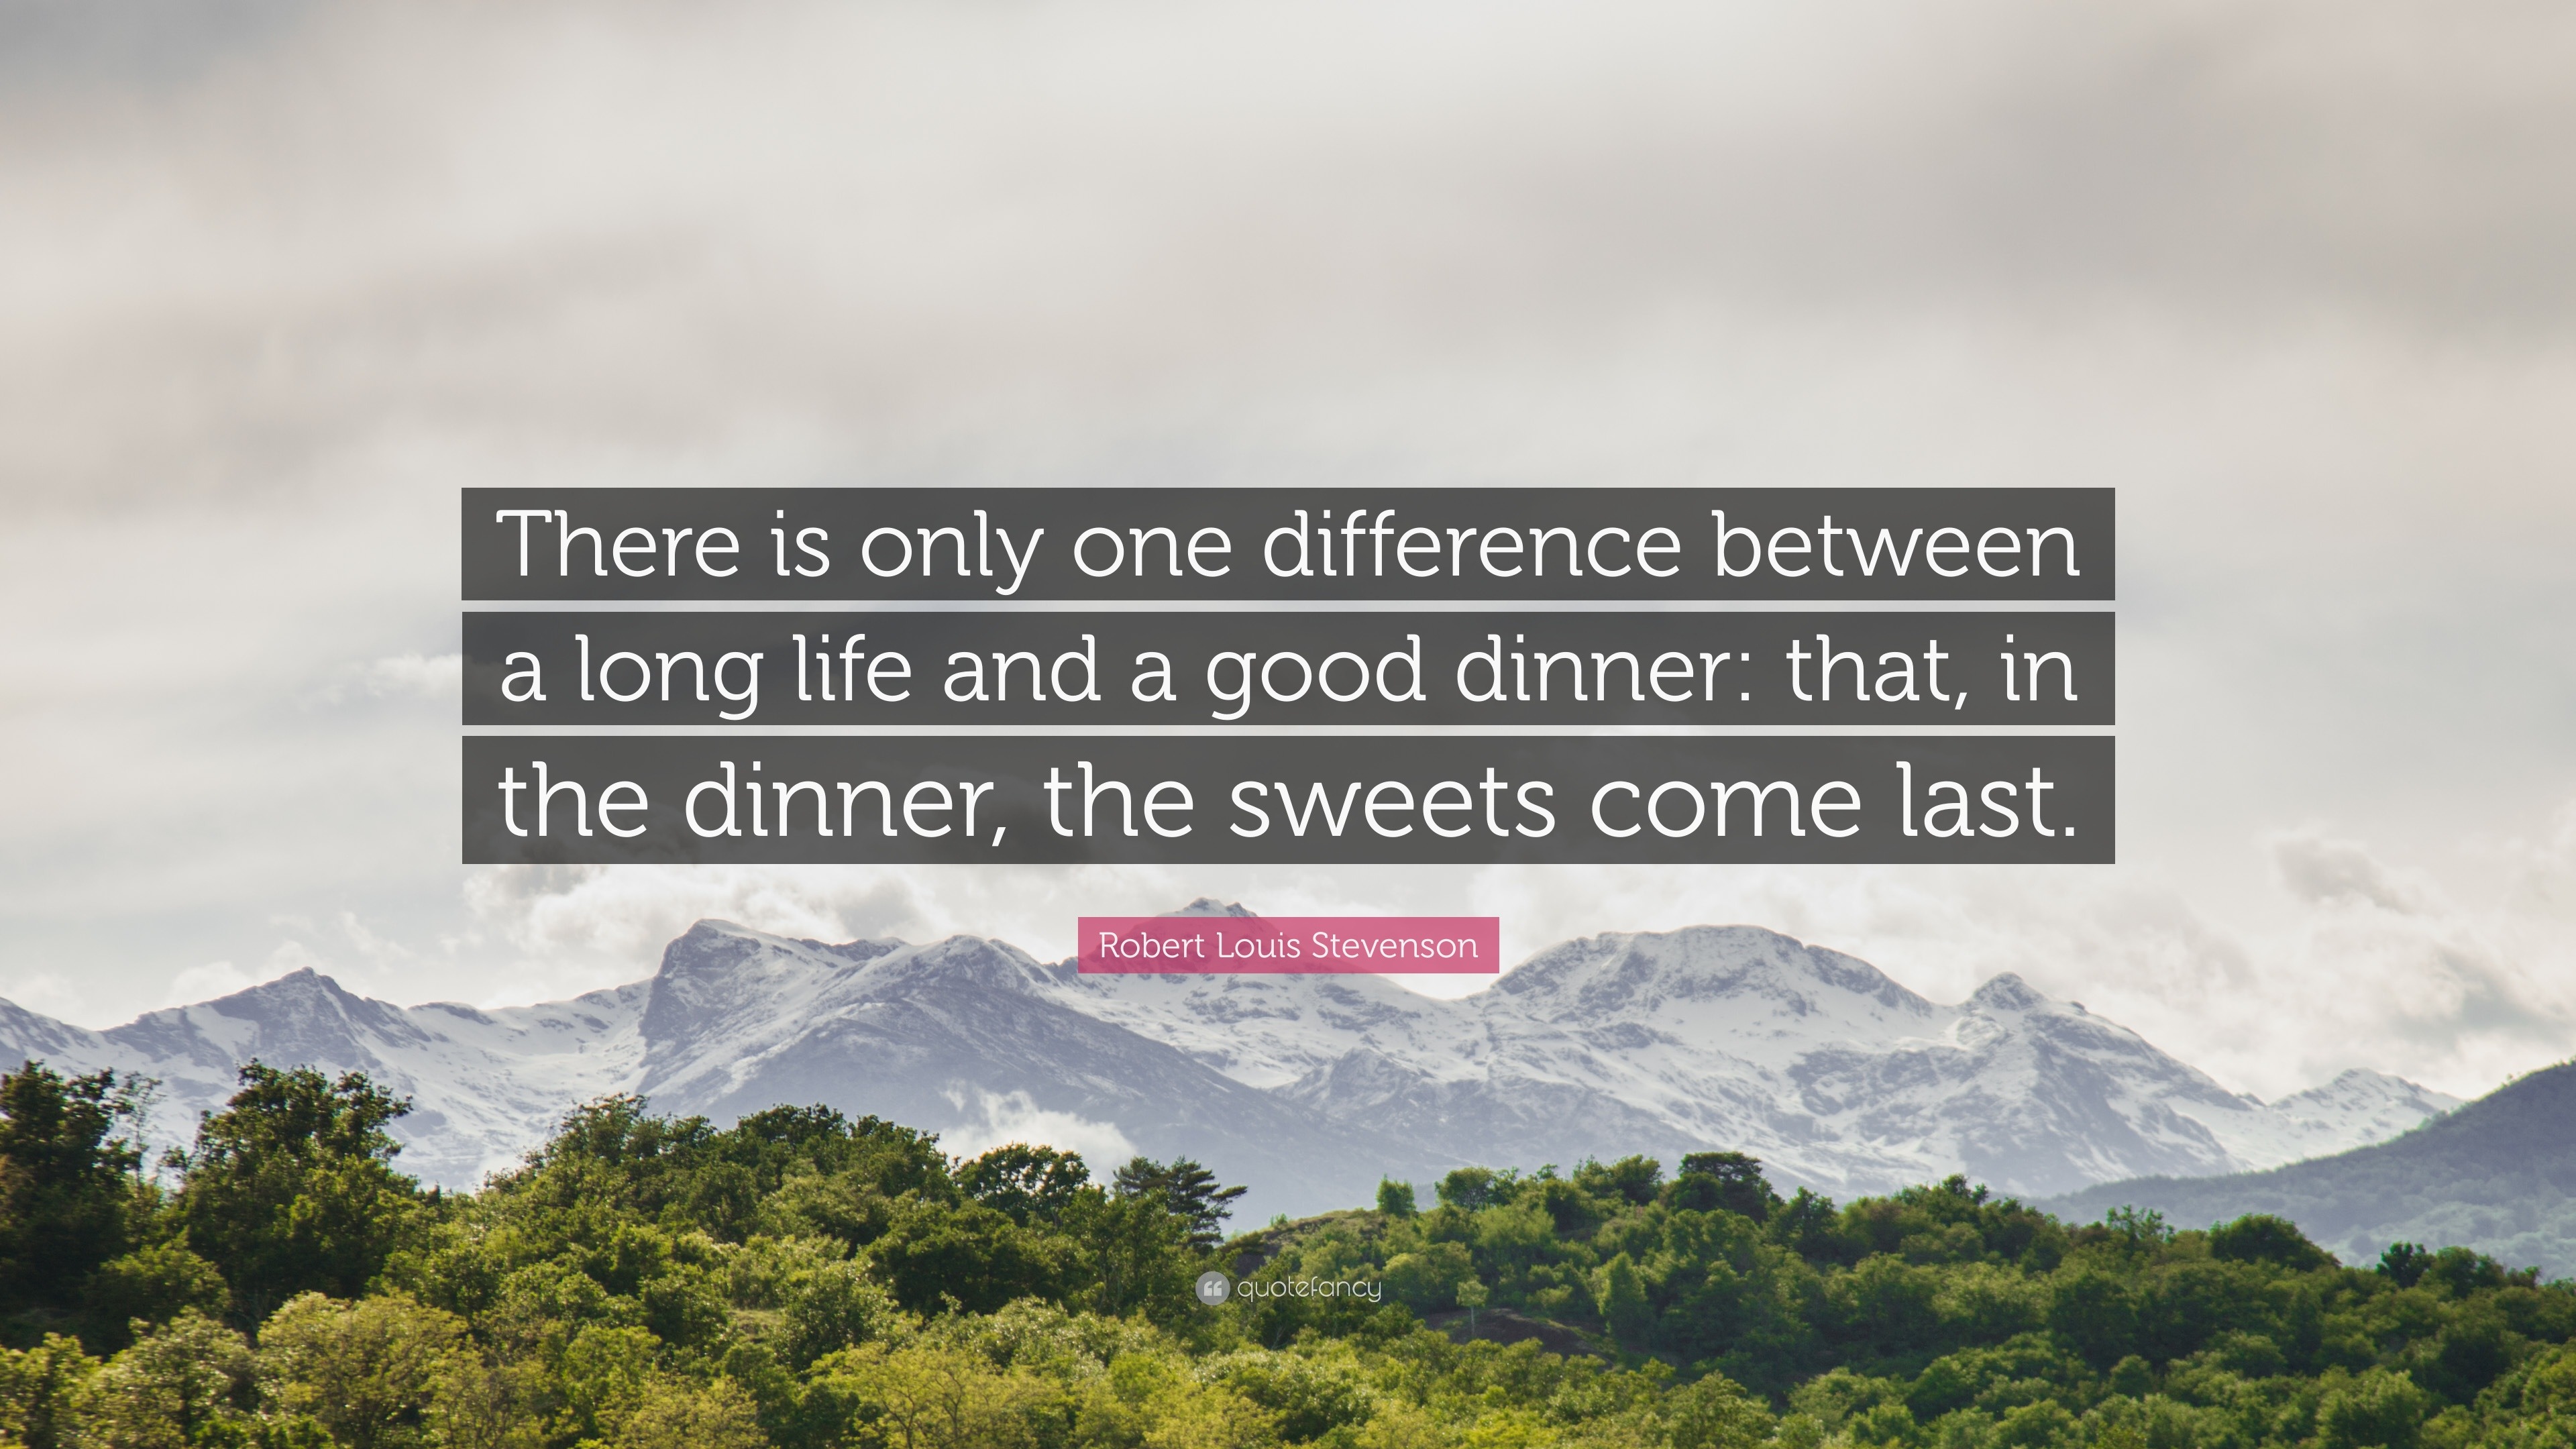 Robert Louis Stevenson - There is only one difference